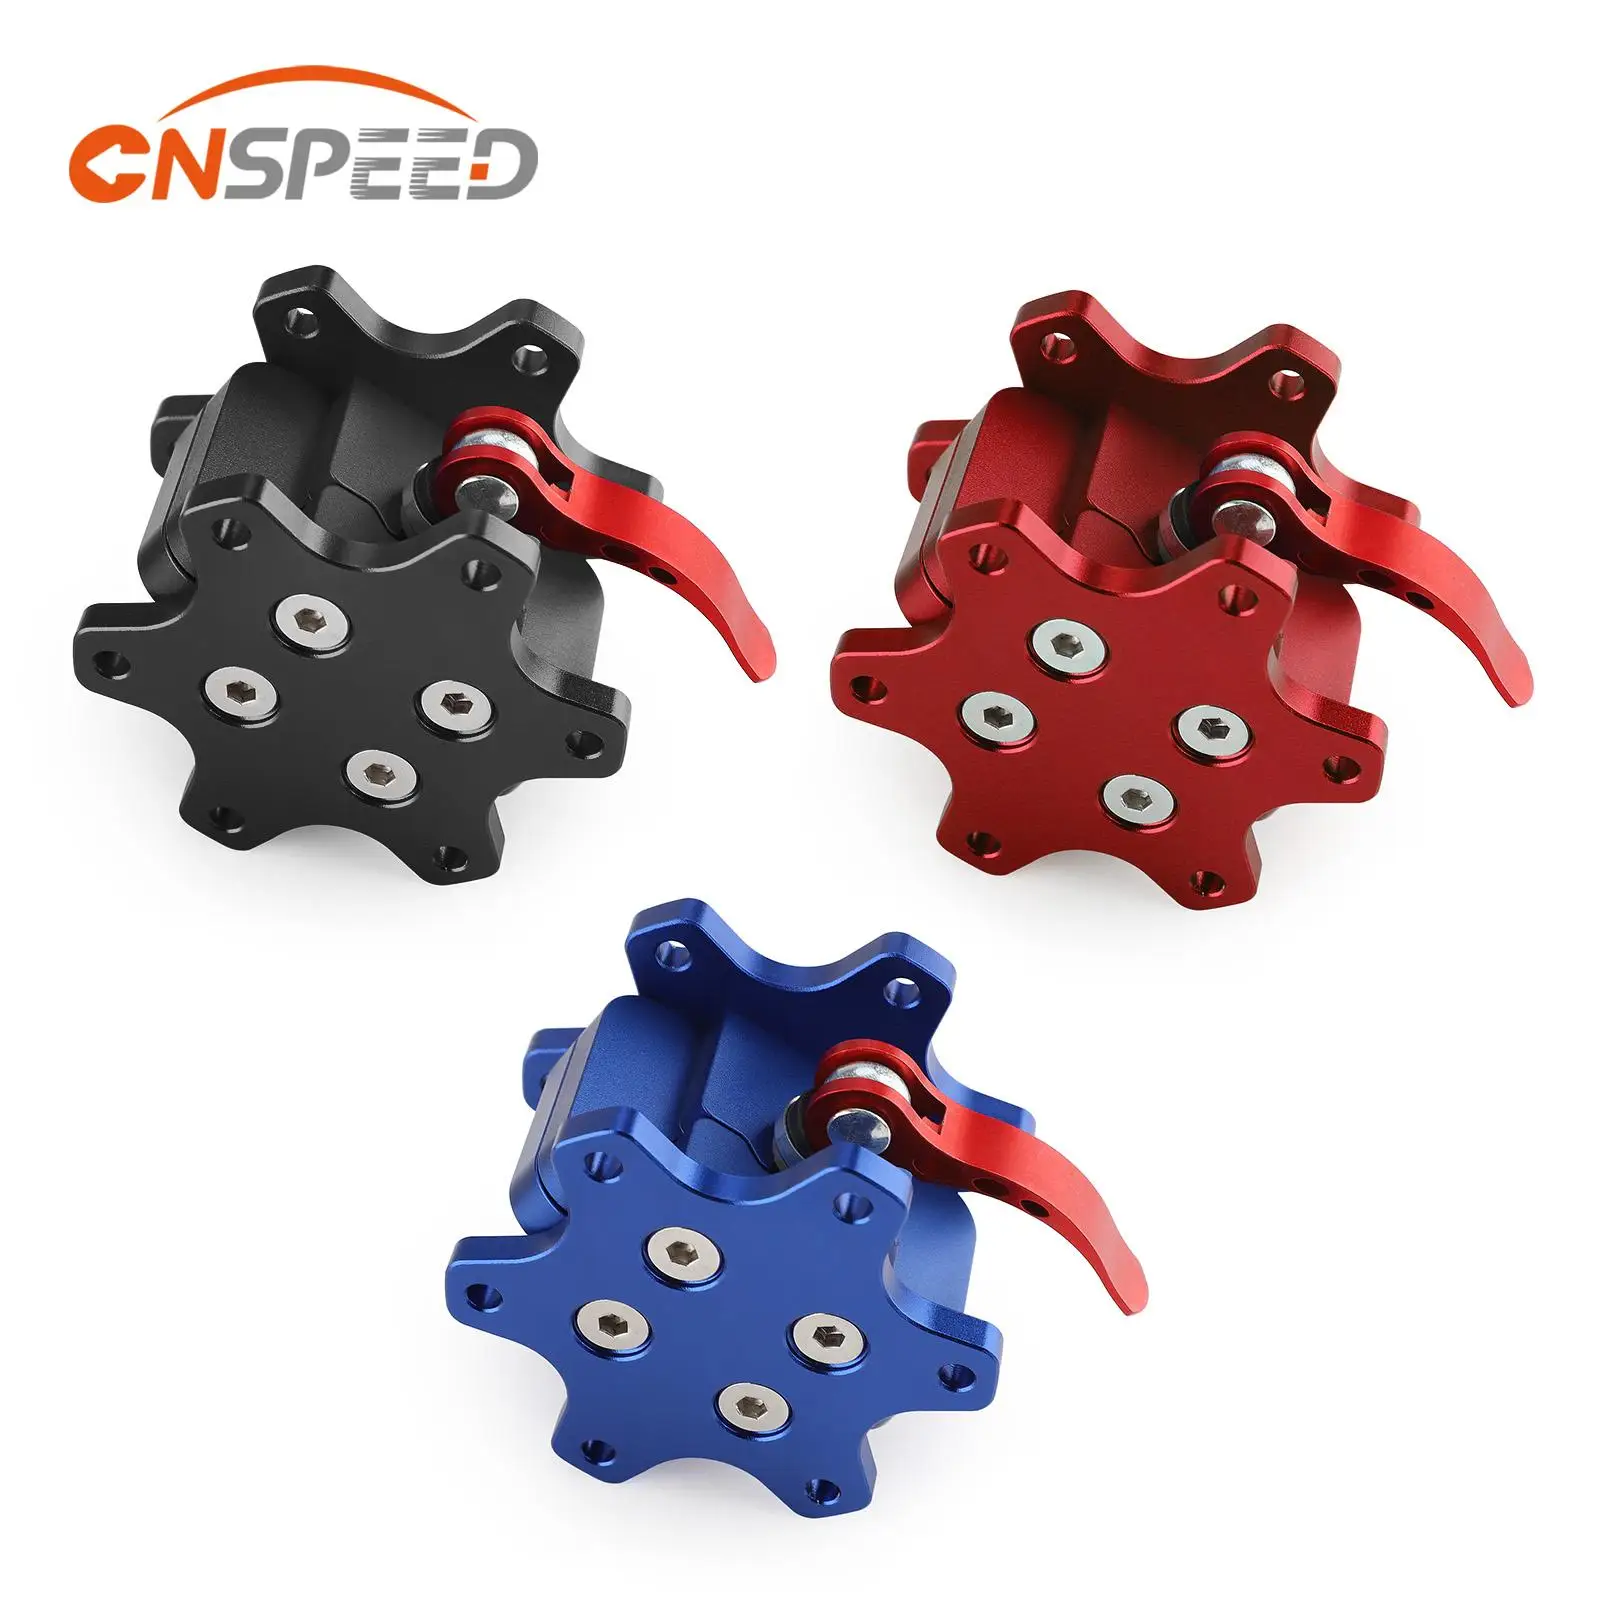 

CNSPEED Aluminum Alloy 70MM For Q1R Steering Wheel Quick Release For Simagic For Thrustmaster For Logitech For Racing Games